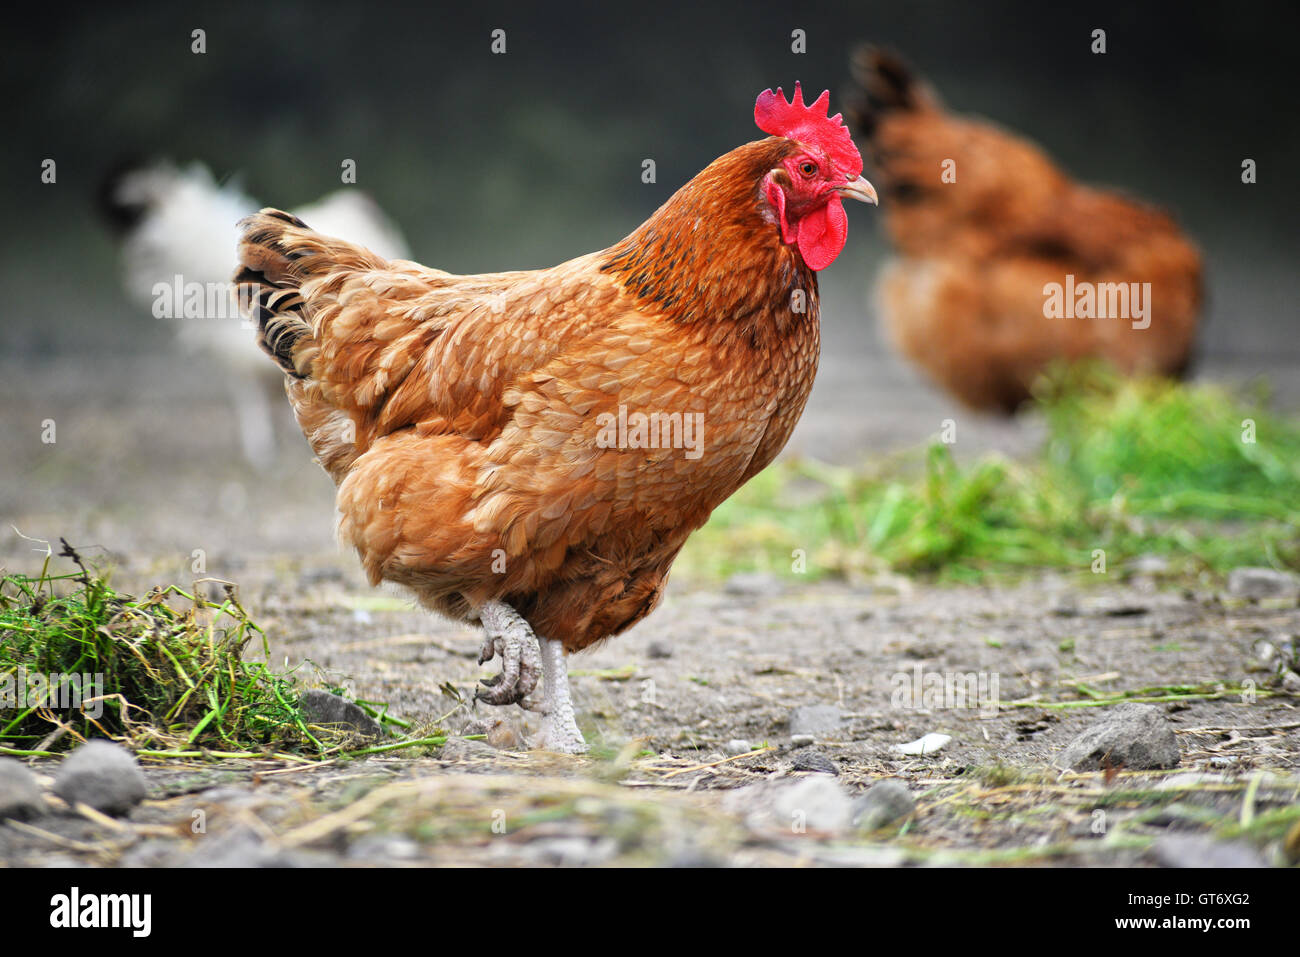 Chickens on traditional free range poultry farm. Stock Photo